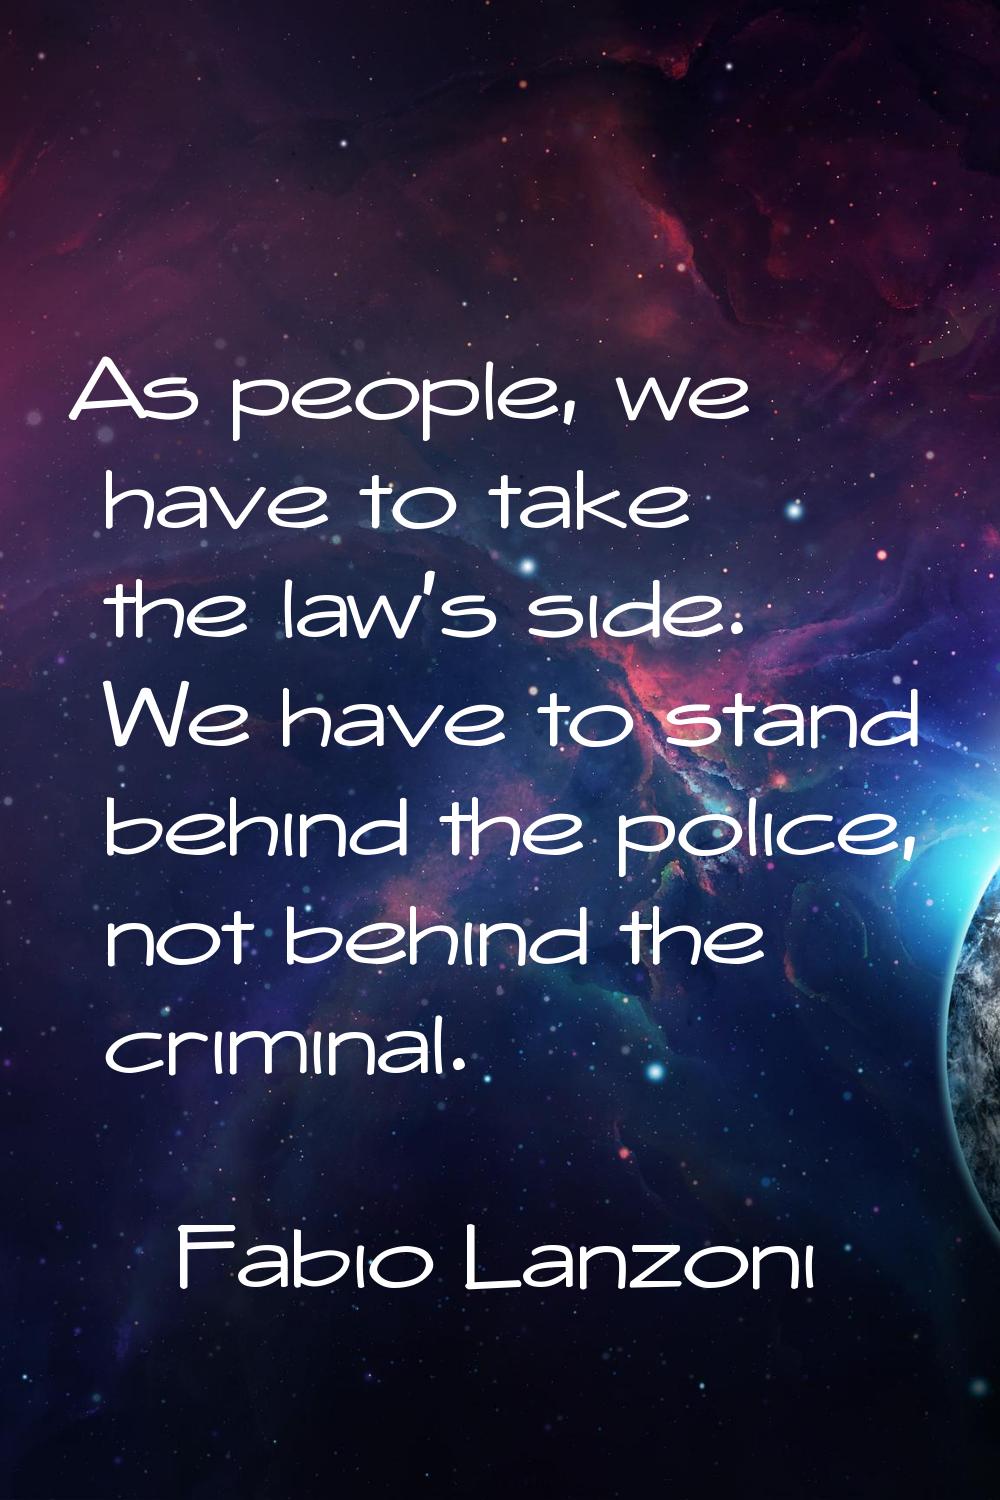 As people, we have to take the law's side. We have to stand behind the police, not behind the crimi